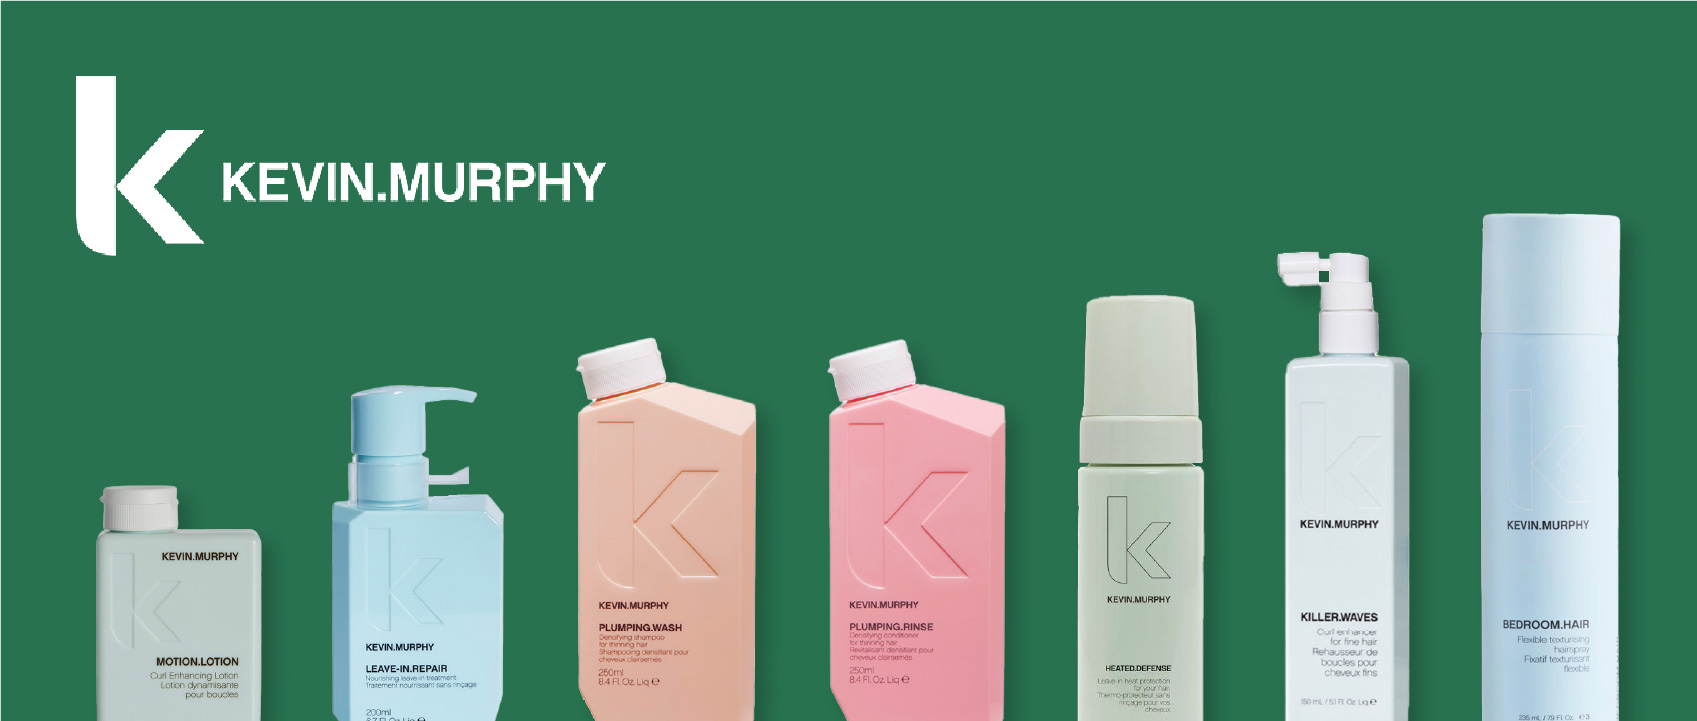 Kevin Murphy Ethical  CrueltyFree Hair Products Explained  AMR